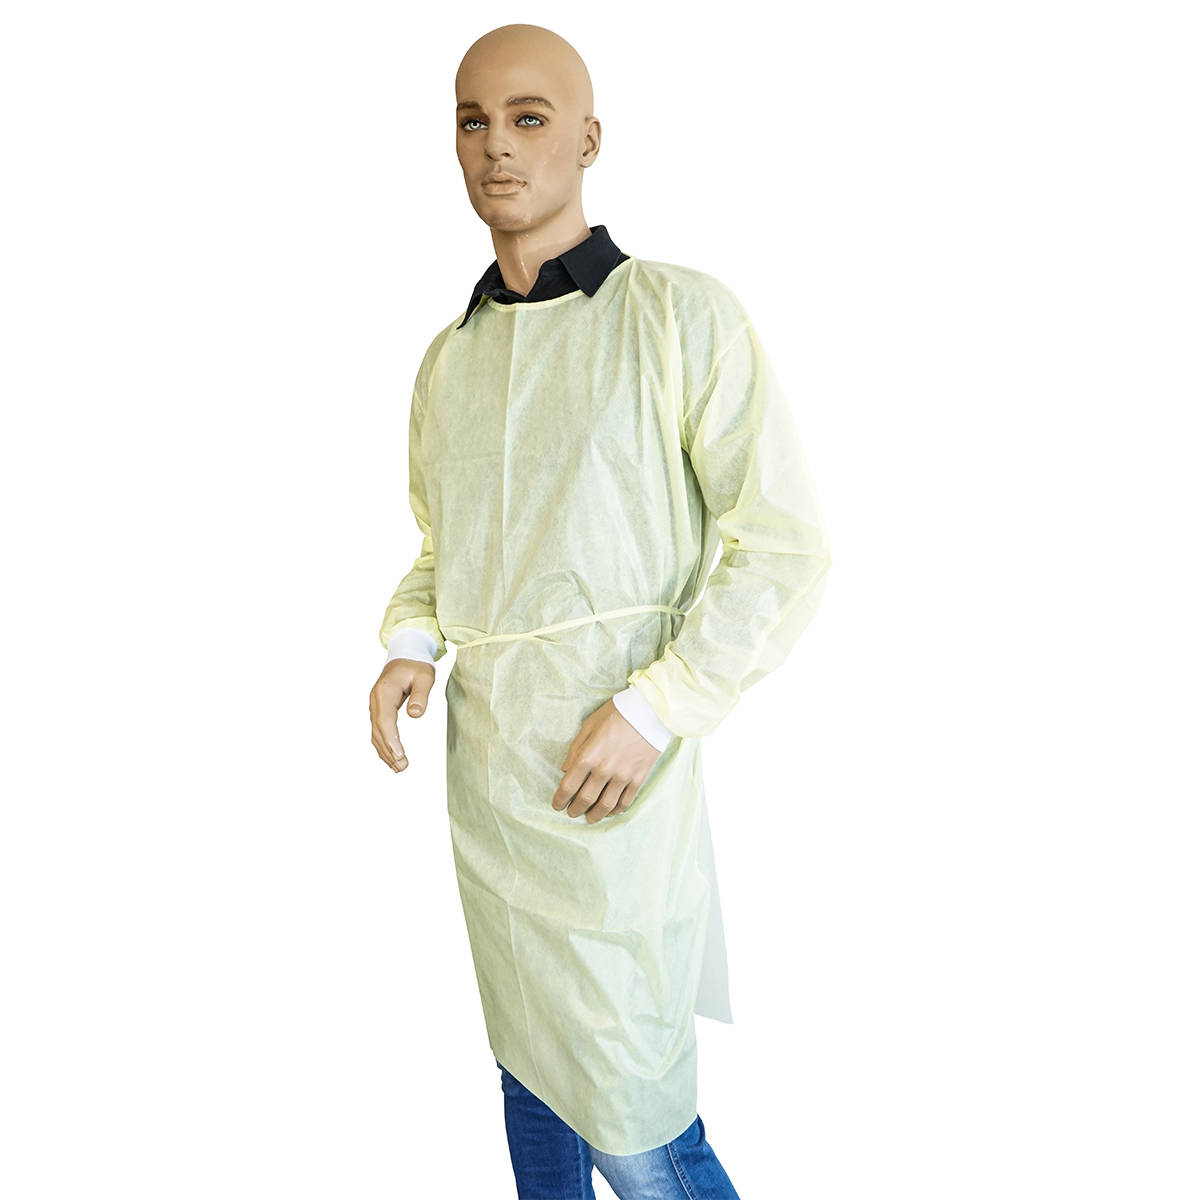 SMS345 Series Classic FluidResistant Multilayer SMS Isolation Gowns With  Elastic Cuffs  Tronex International Inc